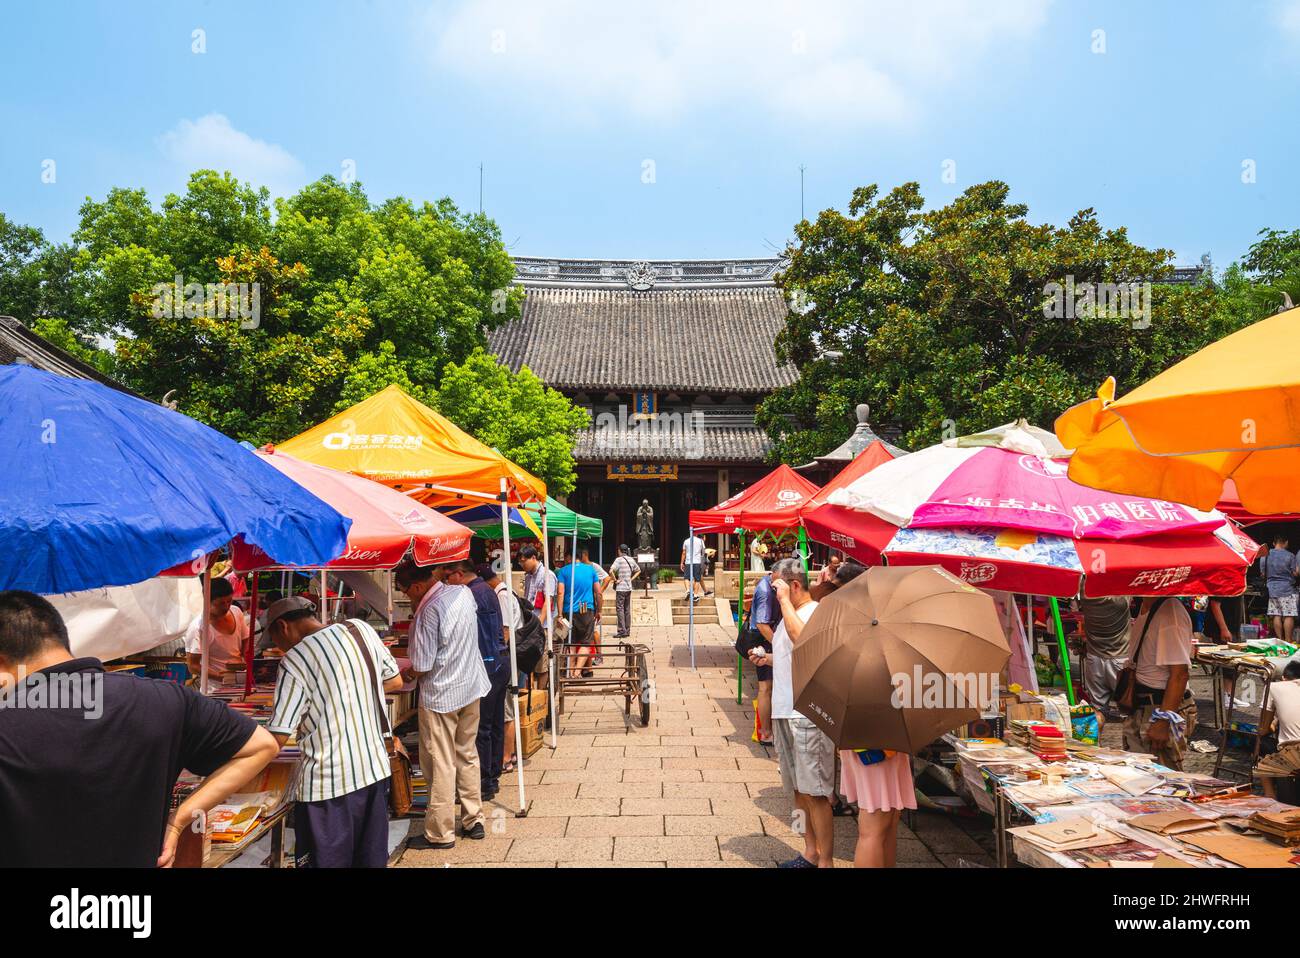 July 29, 2018: Used book market at Confucian Temple in the Huangpu District of Shanghai, China. It has been held every Sunday since 1993. Books, magaz Stock Photo